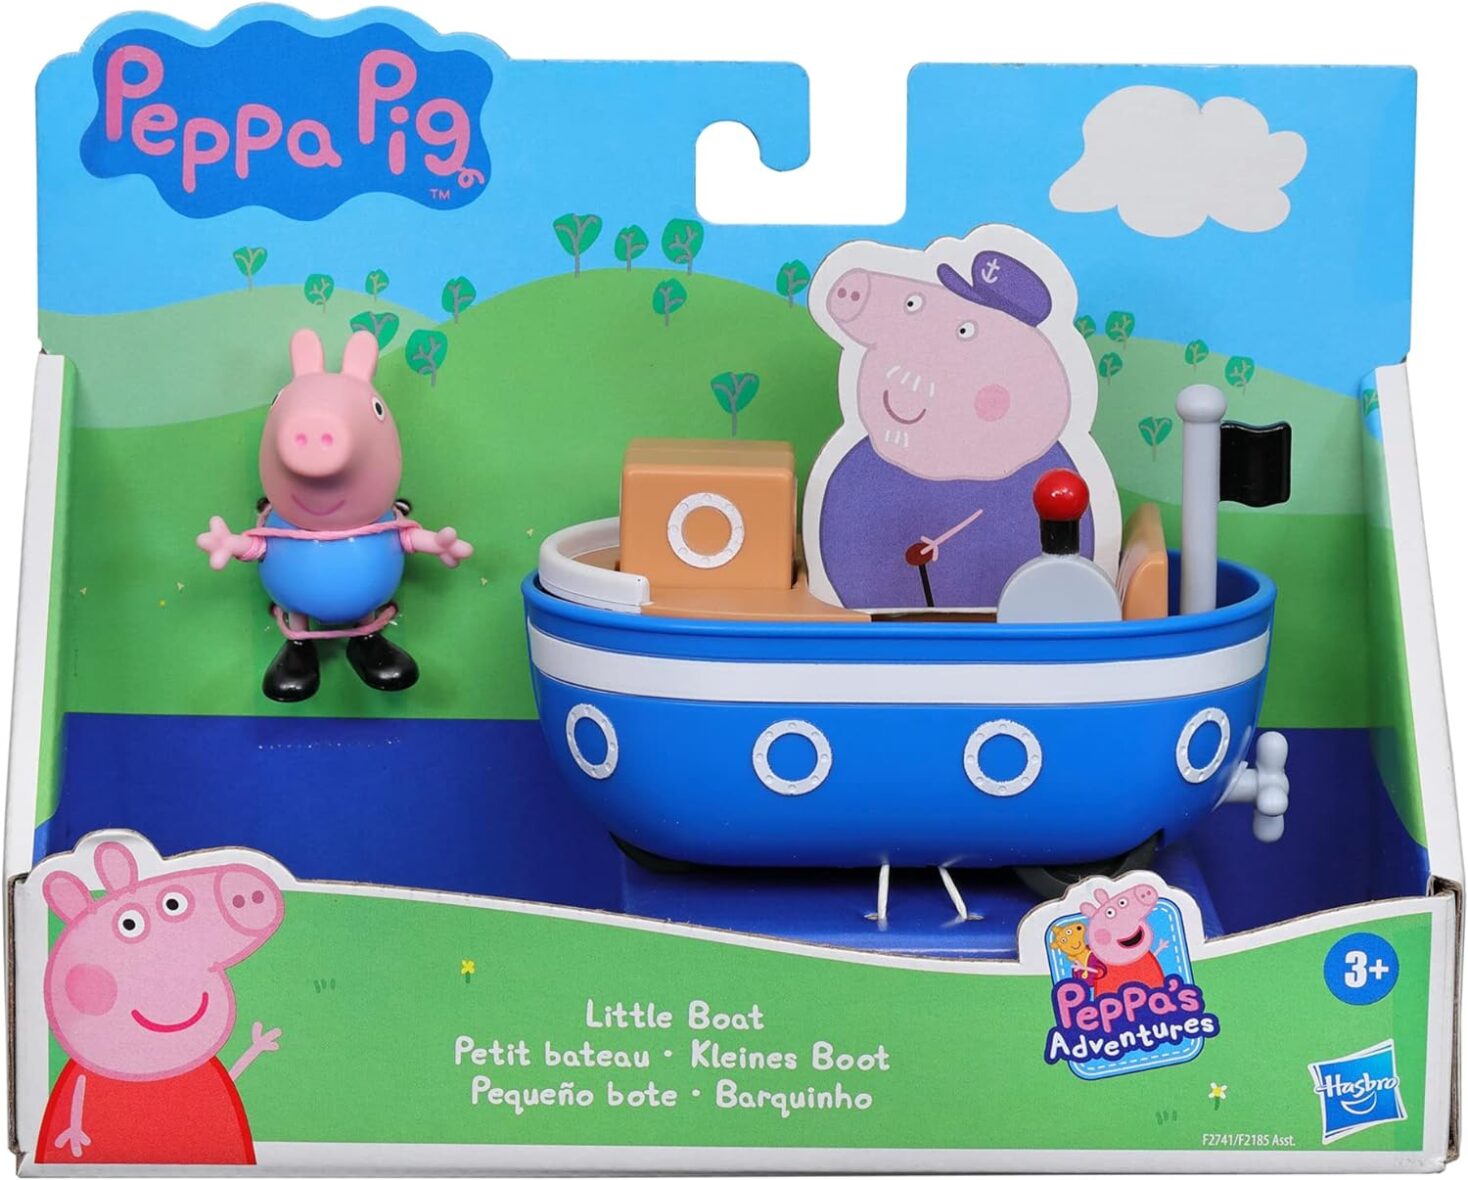 Peppa Pig Peppa’s Adventures Little Boat Toy Includes 3-inch George Pig Figure